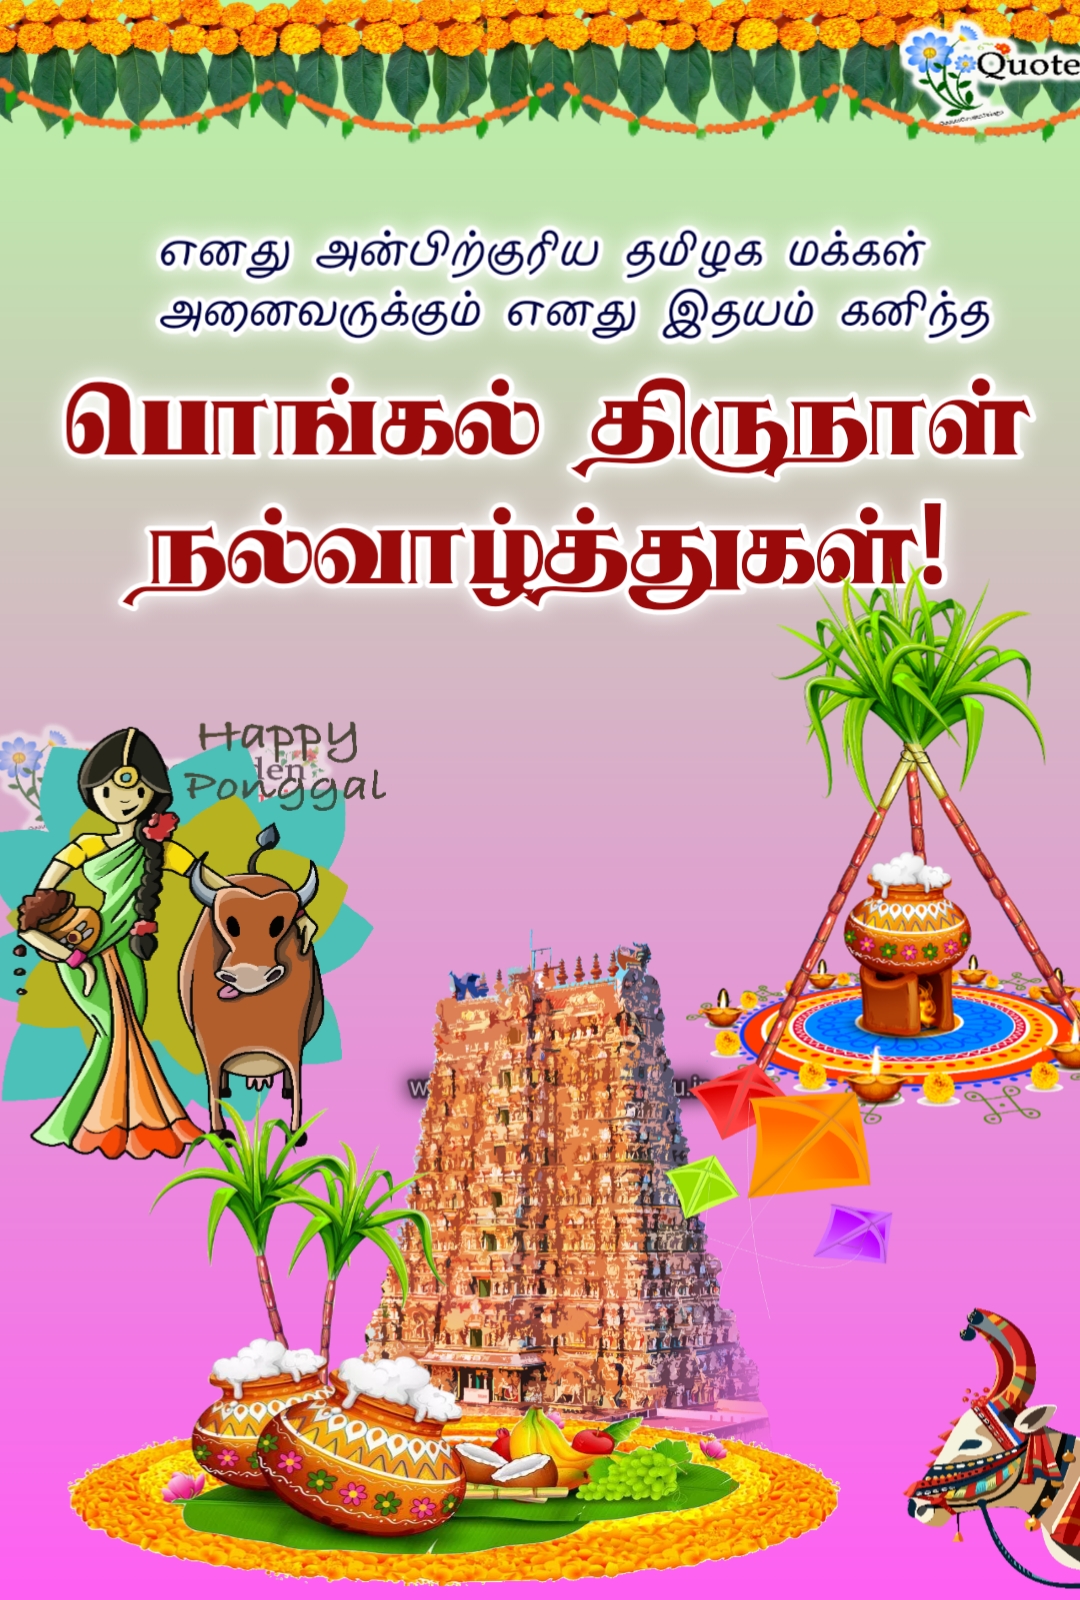 Happy Pongal 2021 wishes images in Tamil | QUOTES GARDEN TELUGU ...